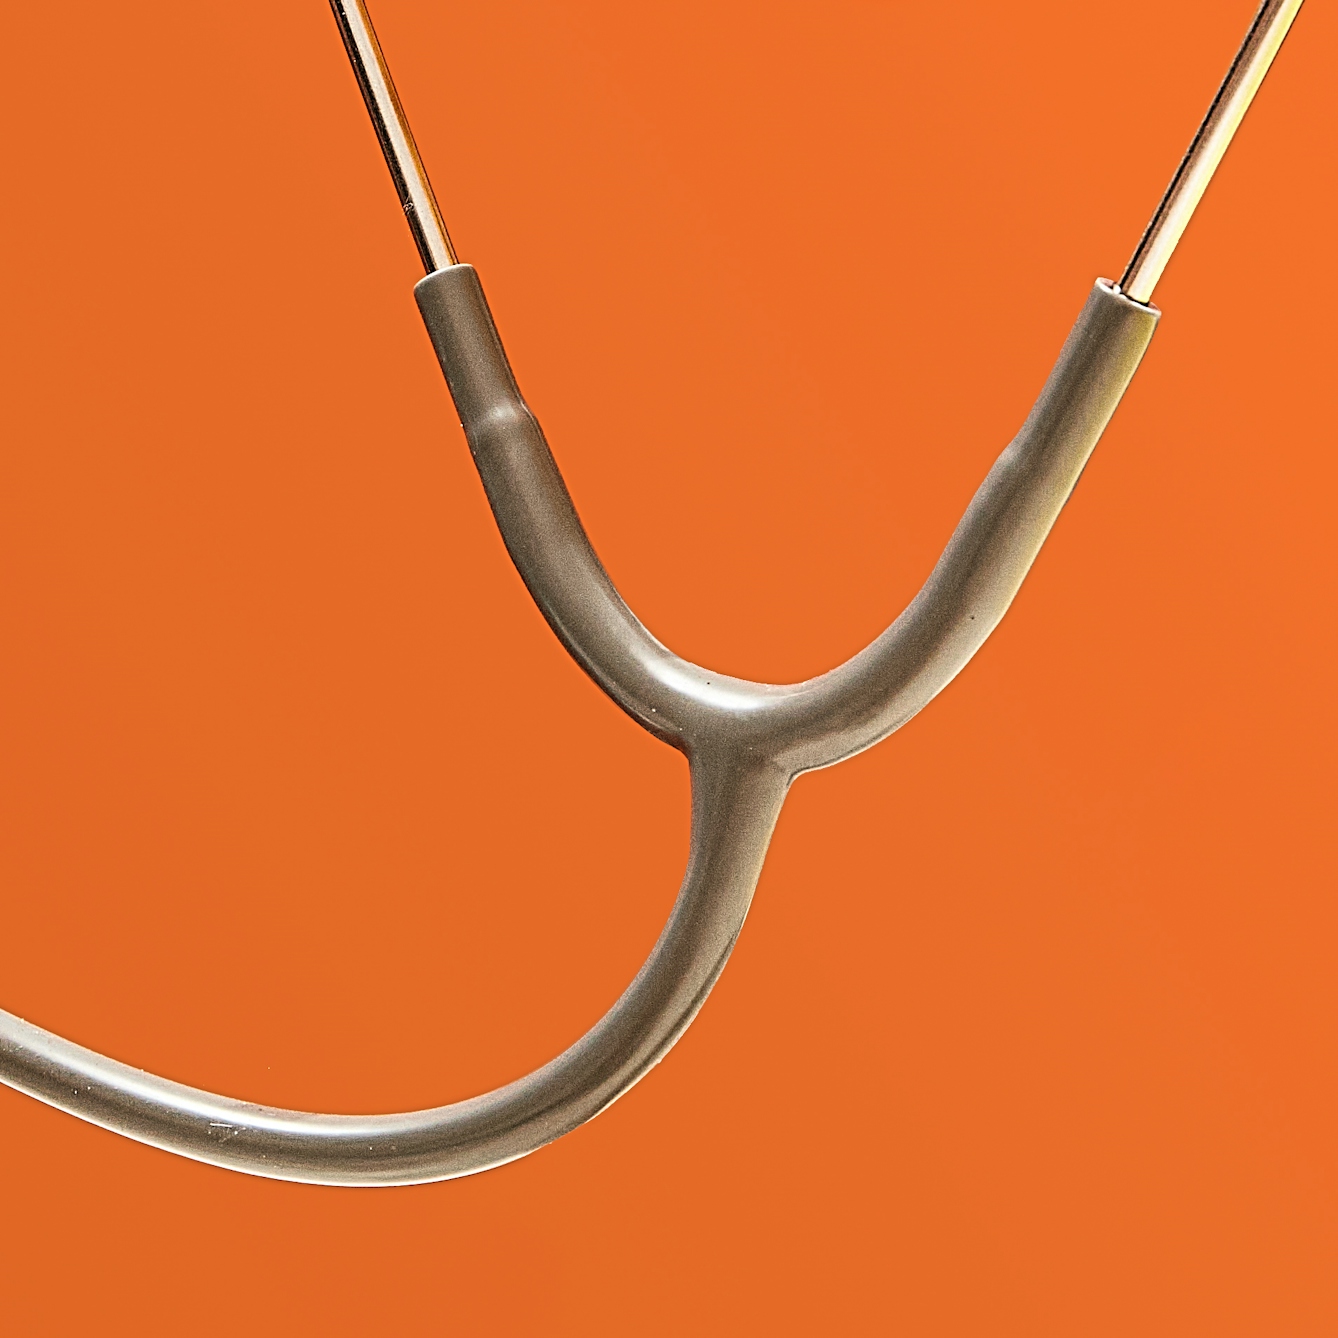 Photograph of a section of a grey stethoscope floating in front of a bright orange background.